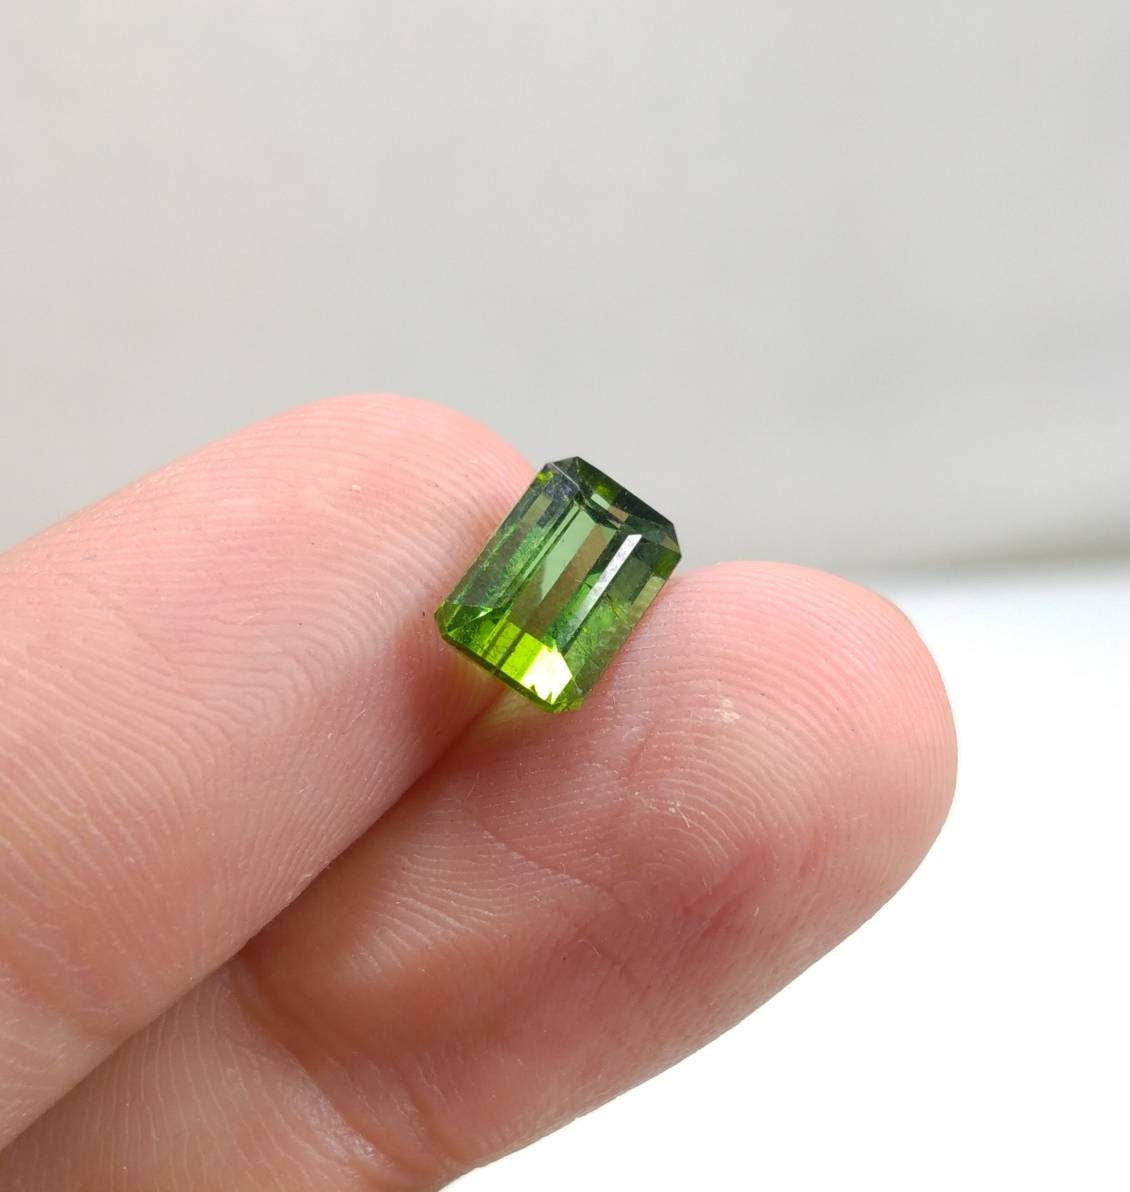 ARSAA GEMS AND MINERALSNatural high quality beautiful 2.5 carats faceted radiant shape green tourmaline gem - Premium  from ARSAA GEMS AND MINERALS - Just $50.00! Shop now at ARSAA GEMS AND MINERALS